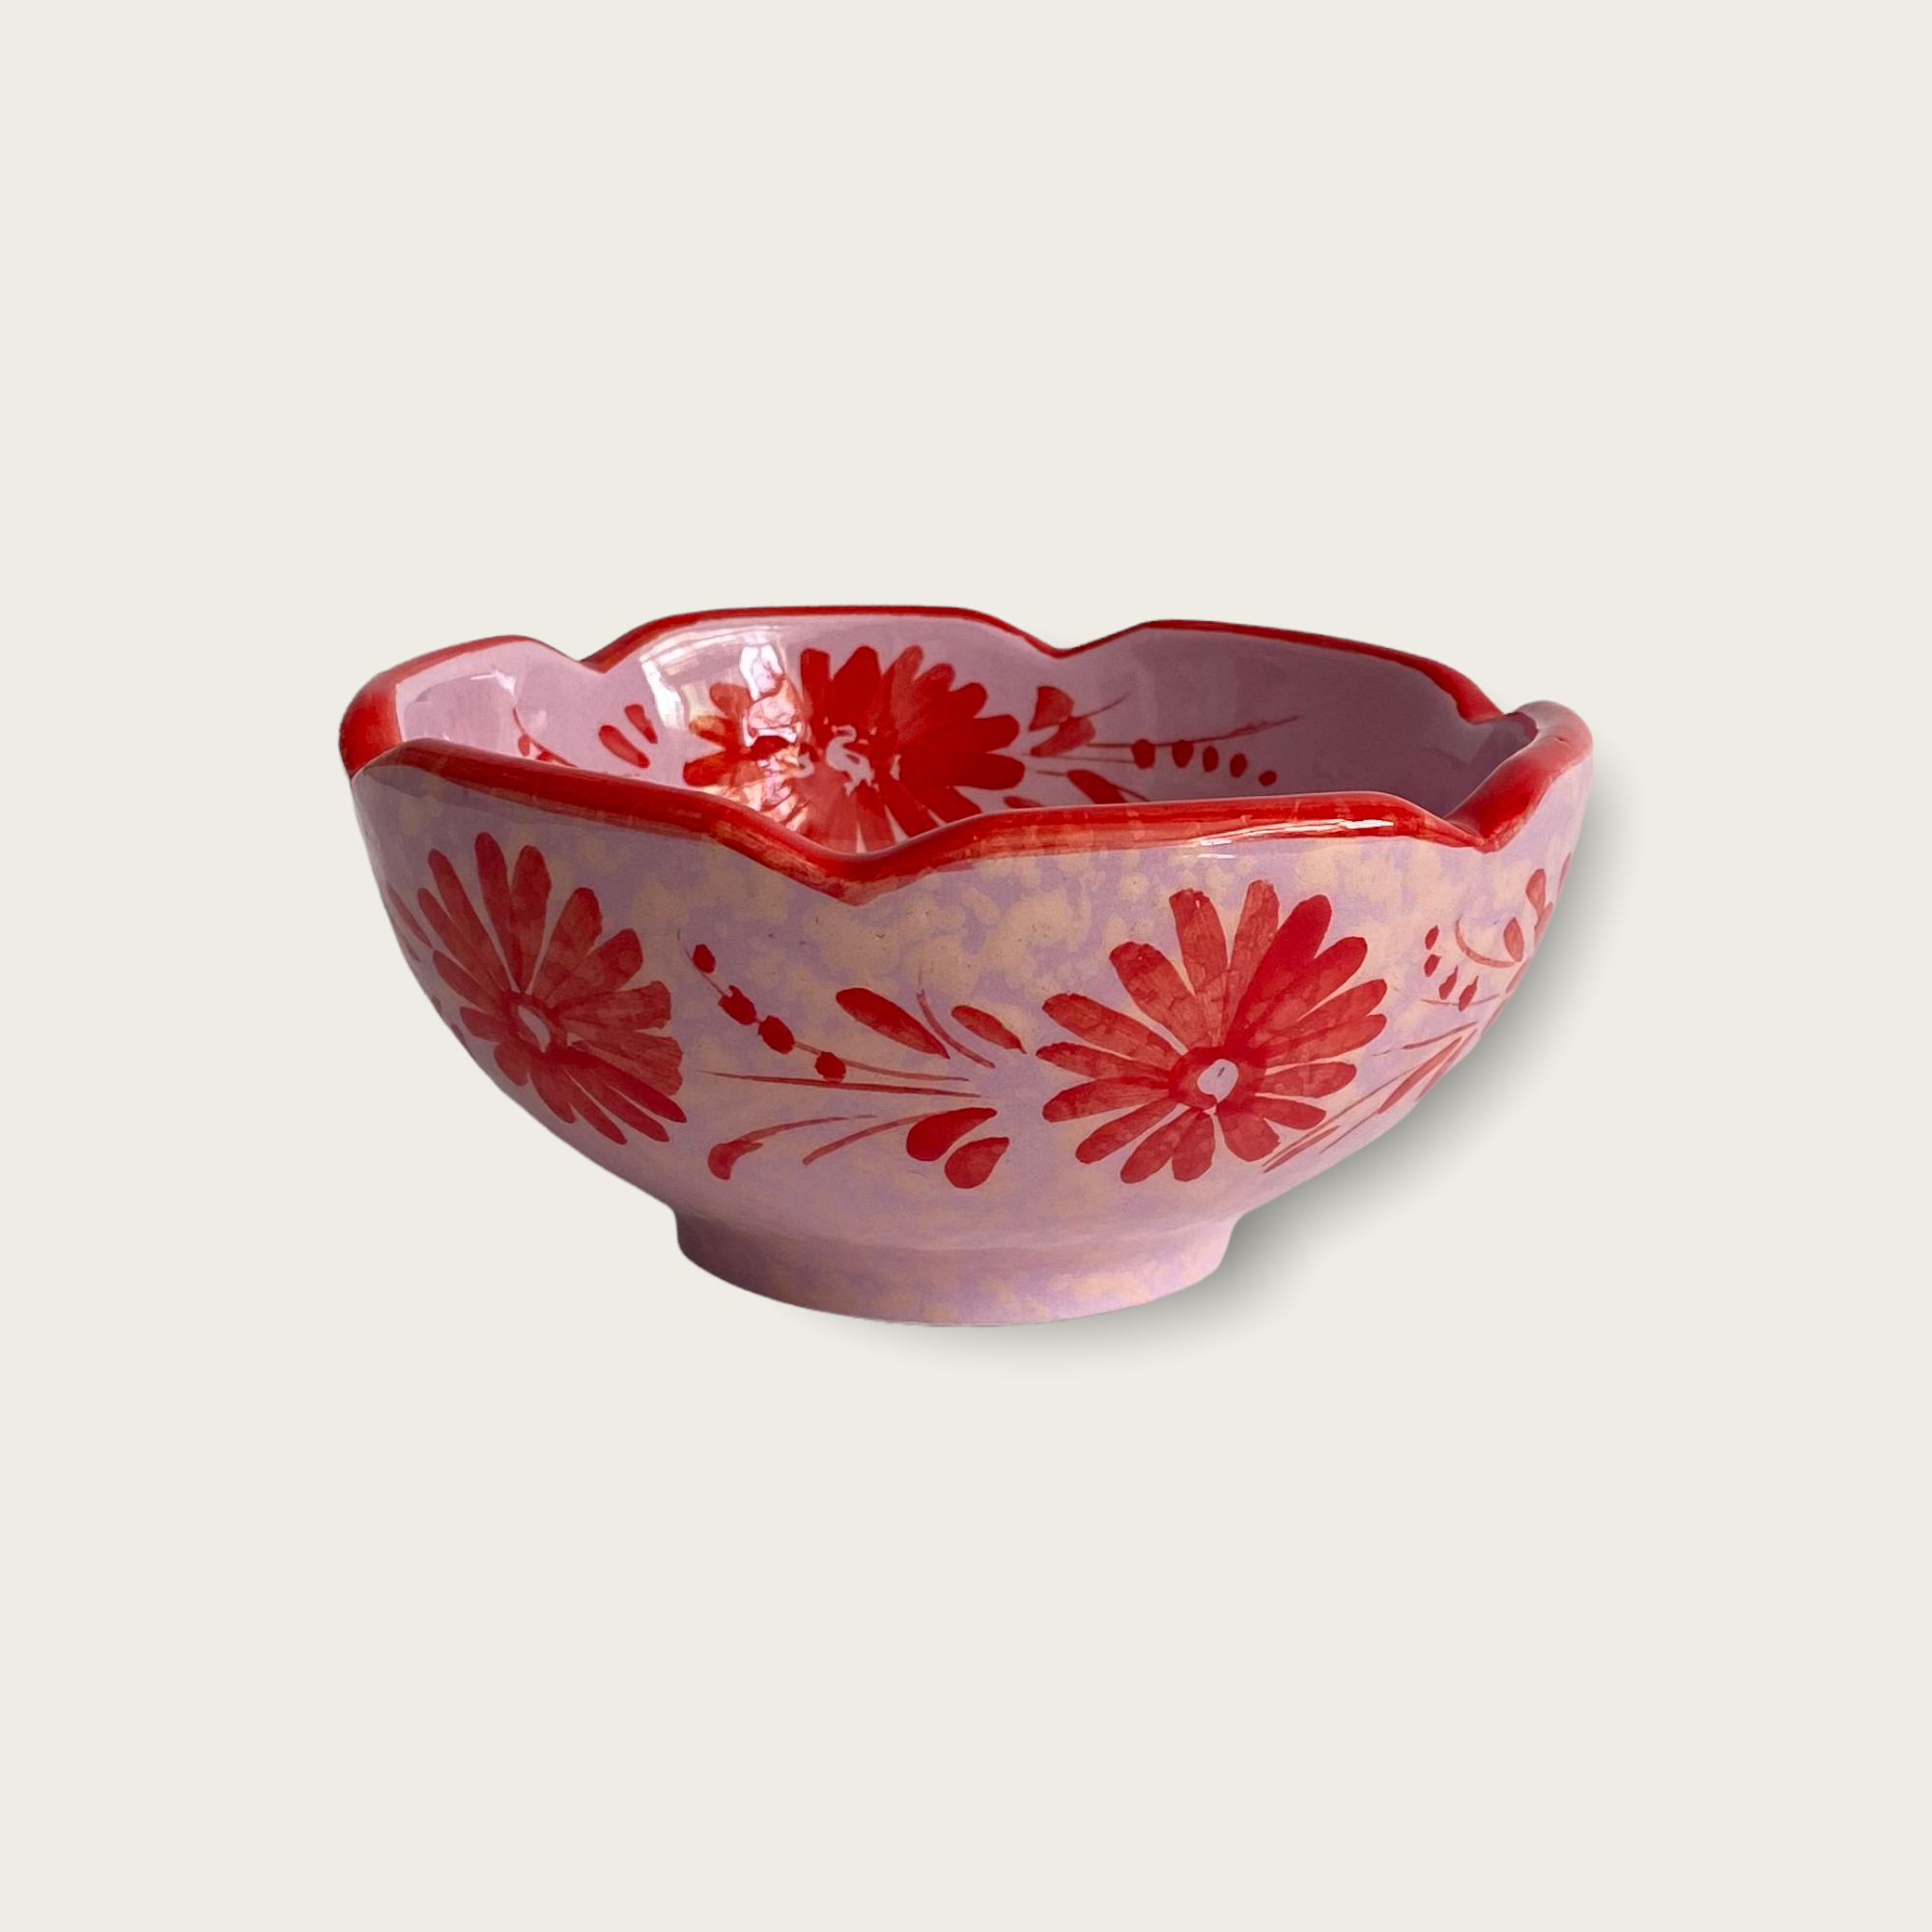 A cute handpainted ceramic bowl that is predominately lilac with red flowers, a red scalloped rim and a light speckled pattern.